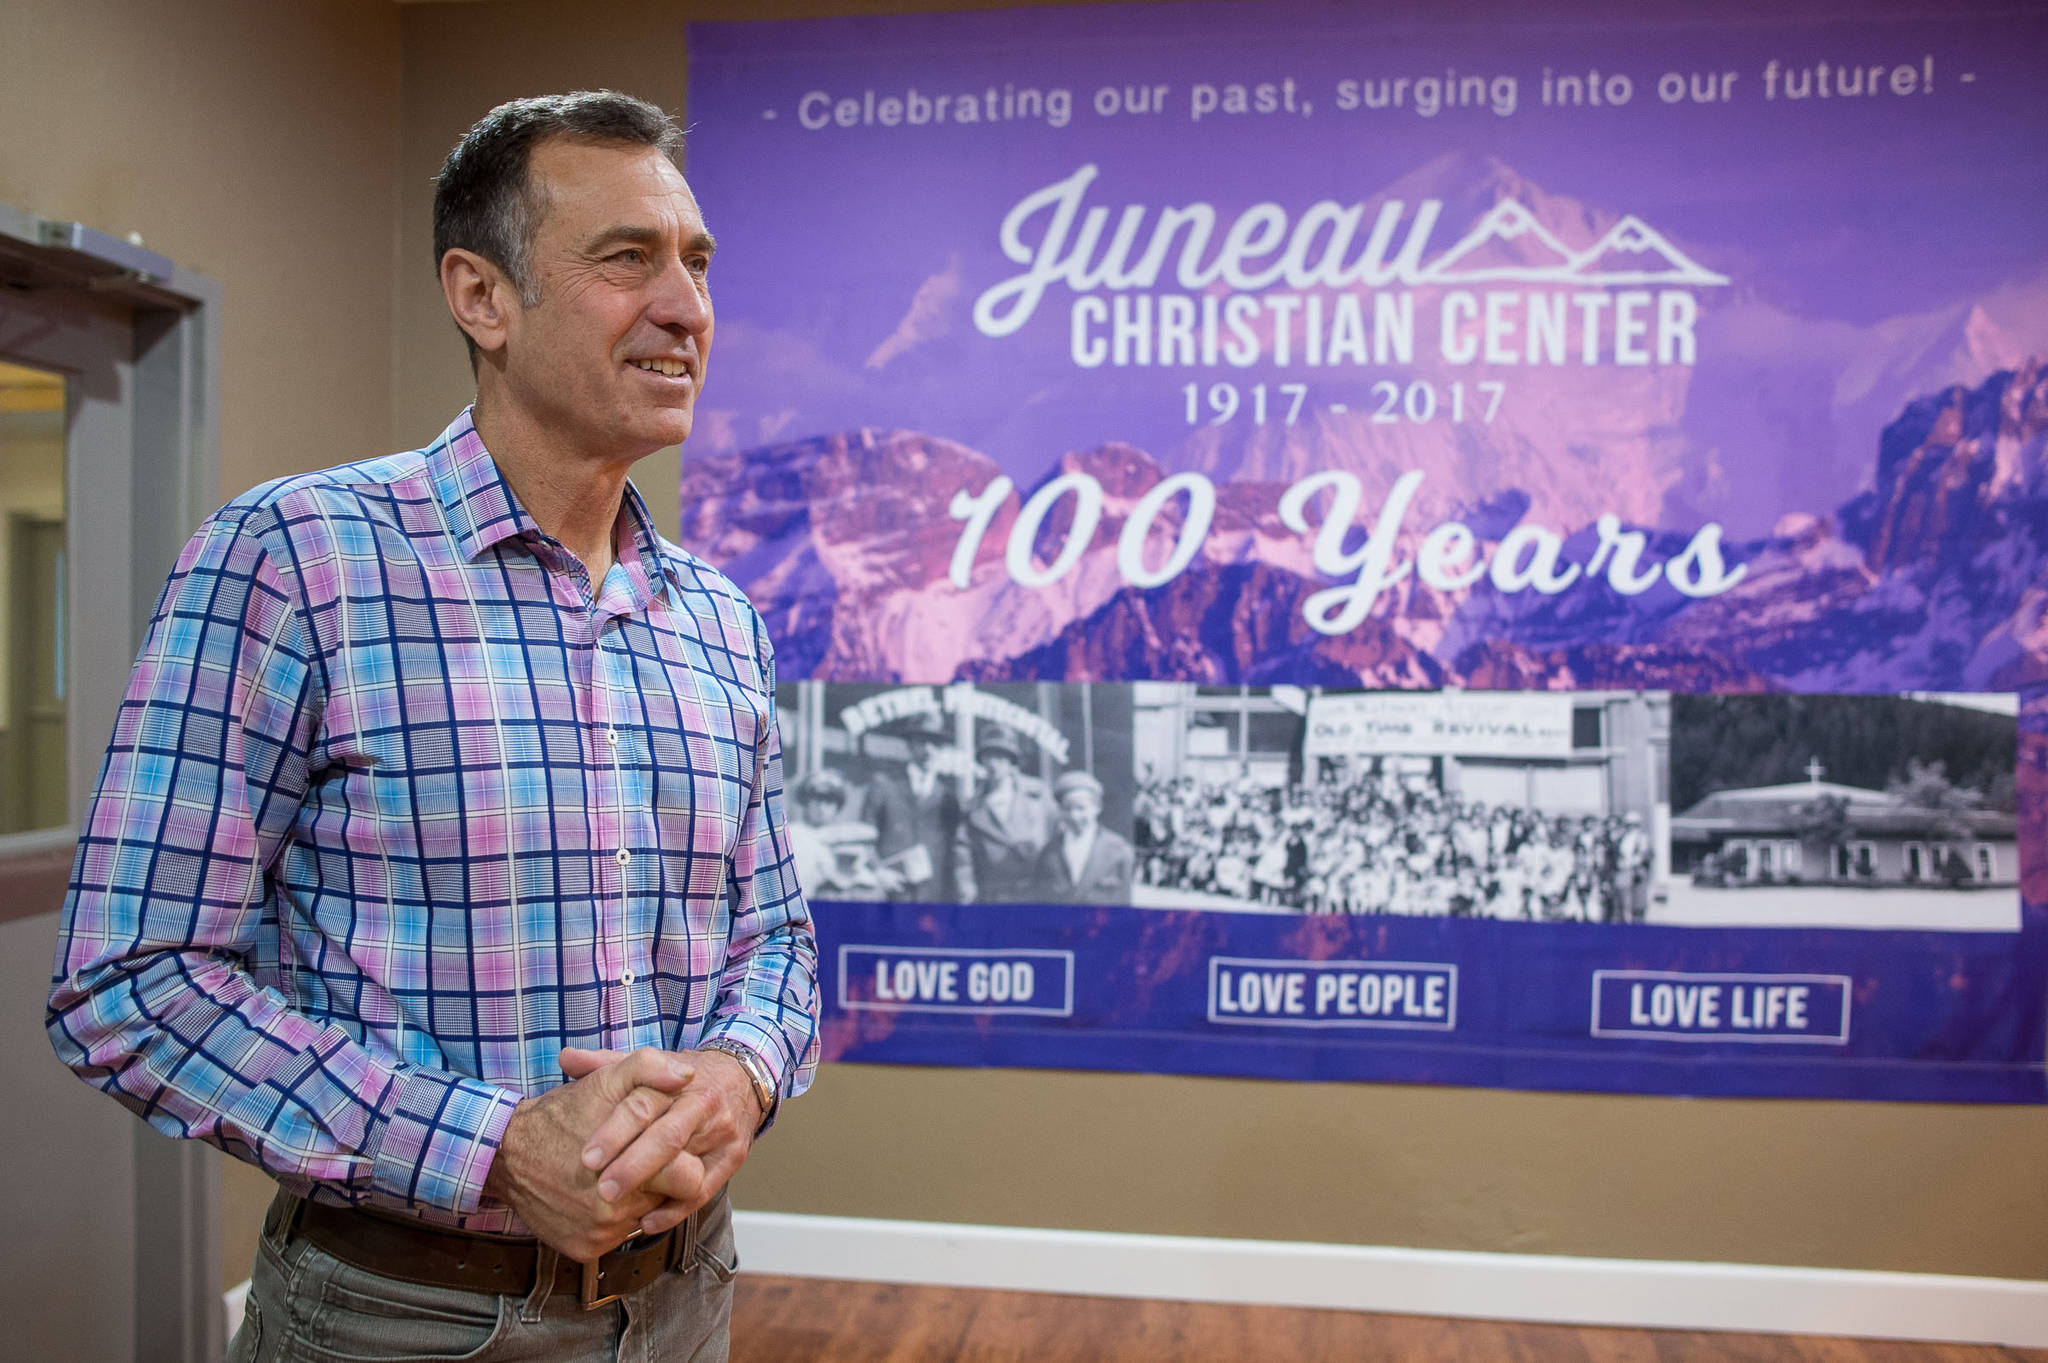 Mike Rose, senior pastor at the Juneau Christian Center, talks about the center’s 100th Anniversay celebration to be held his weekend. The center is located at the corner of Glacier Highway and Old Dairy Road, next to Fred Meyer. Rose has been a pastor at the center for 30 years. (Michael Penn | Juneau Empire)